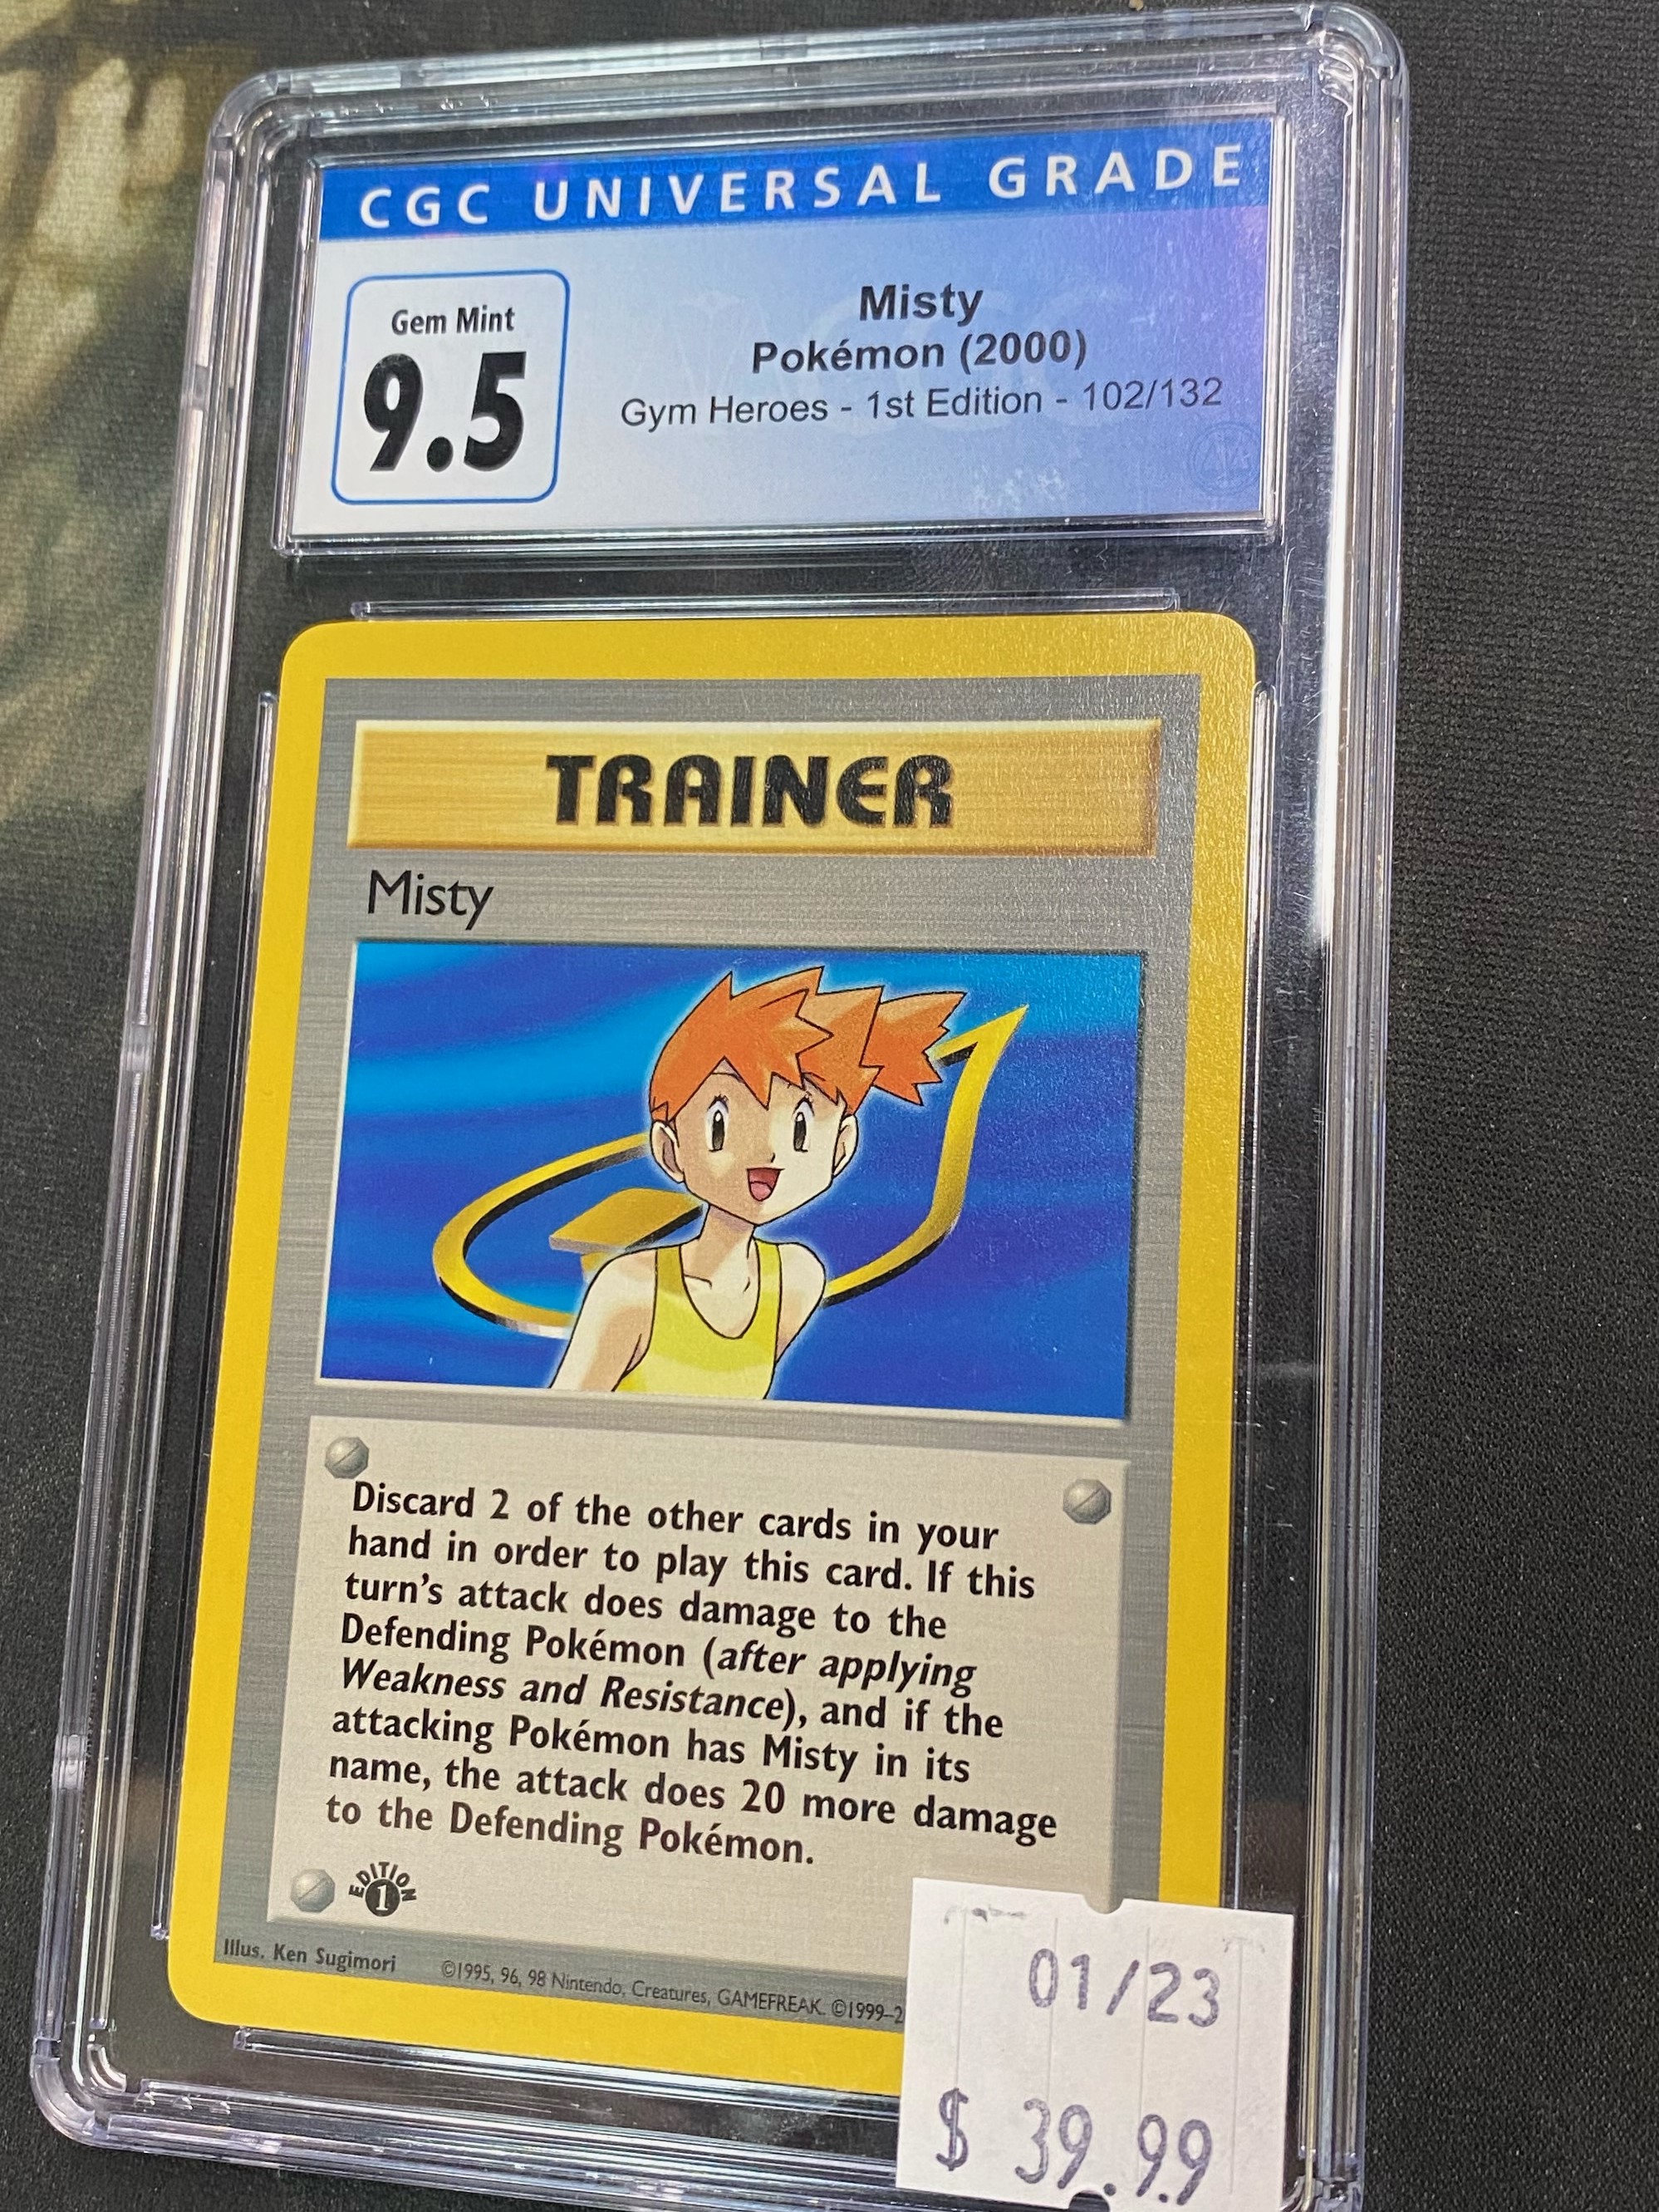 Misty - Gym Heroes - 1st Edition - CGC 9.5